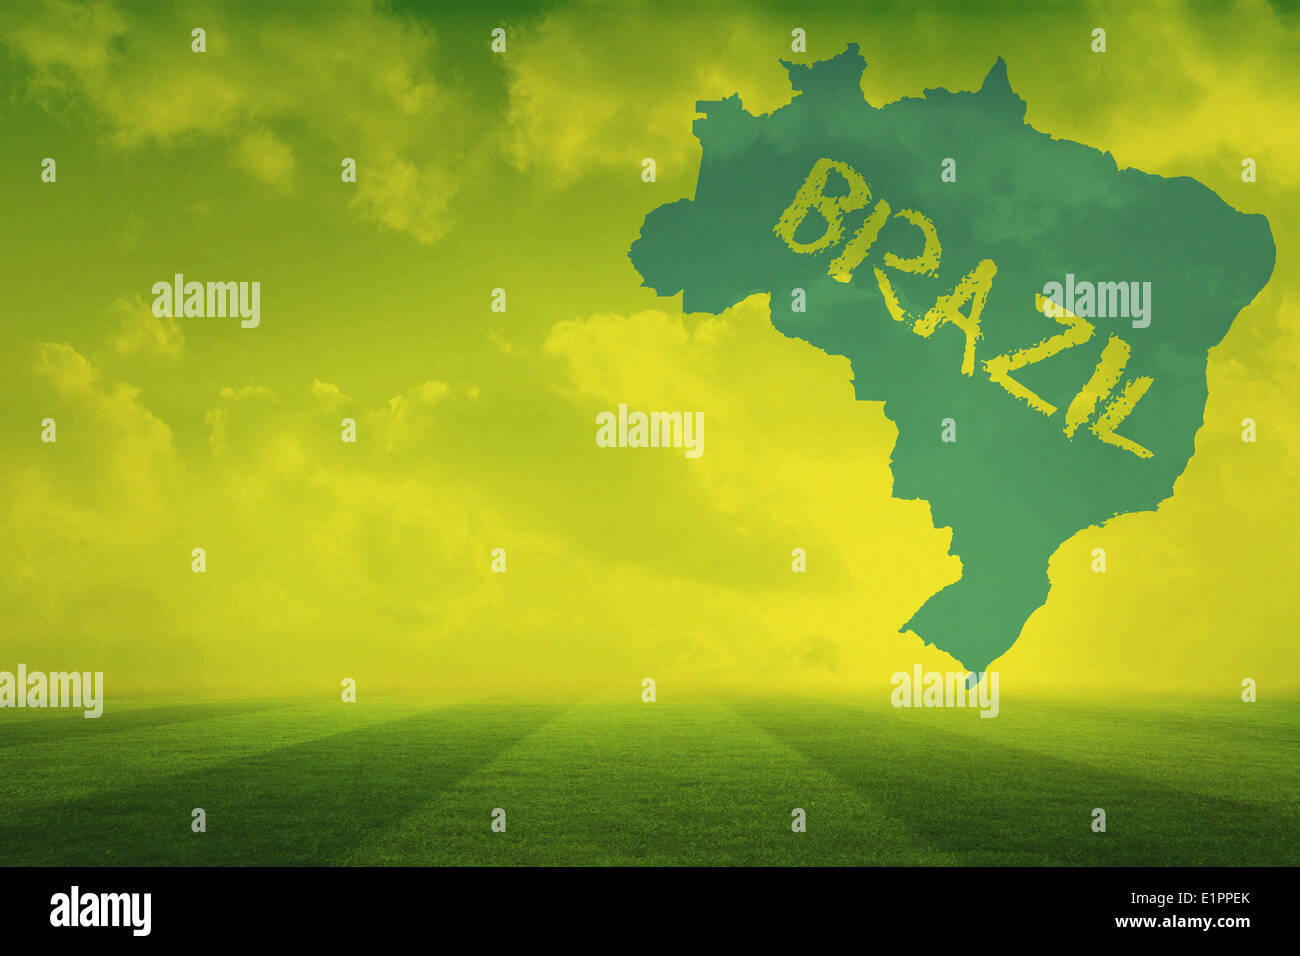 Football pitch with brazil outline and text Stock Photo